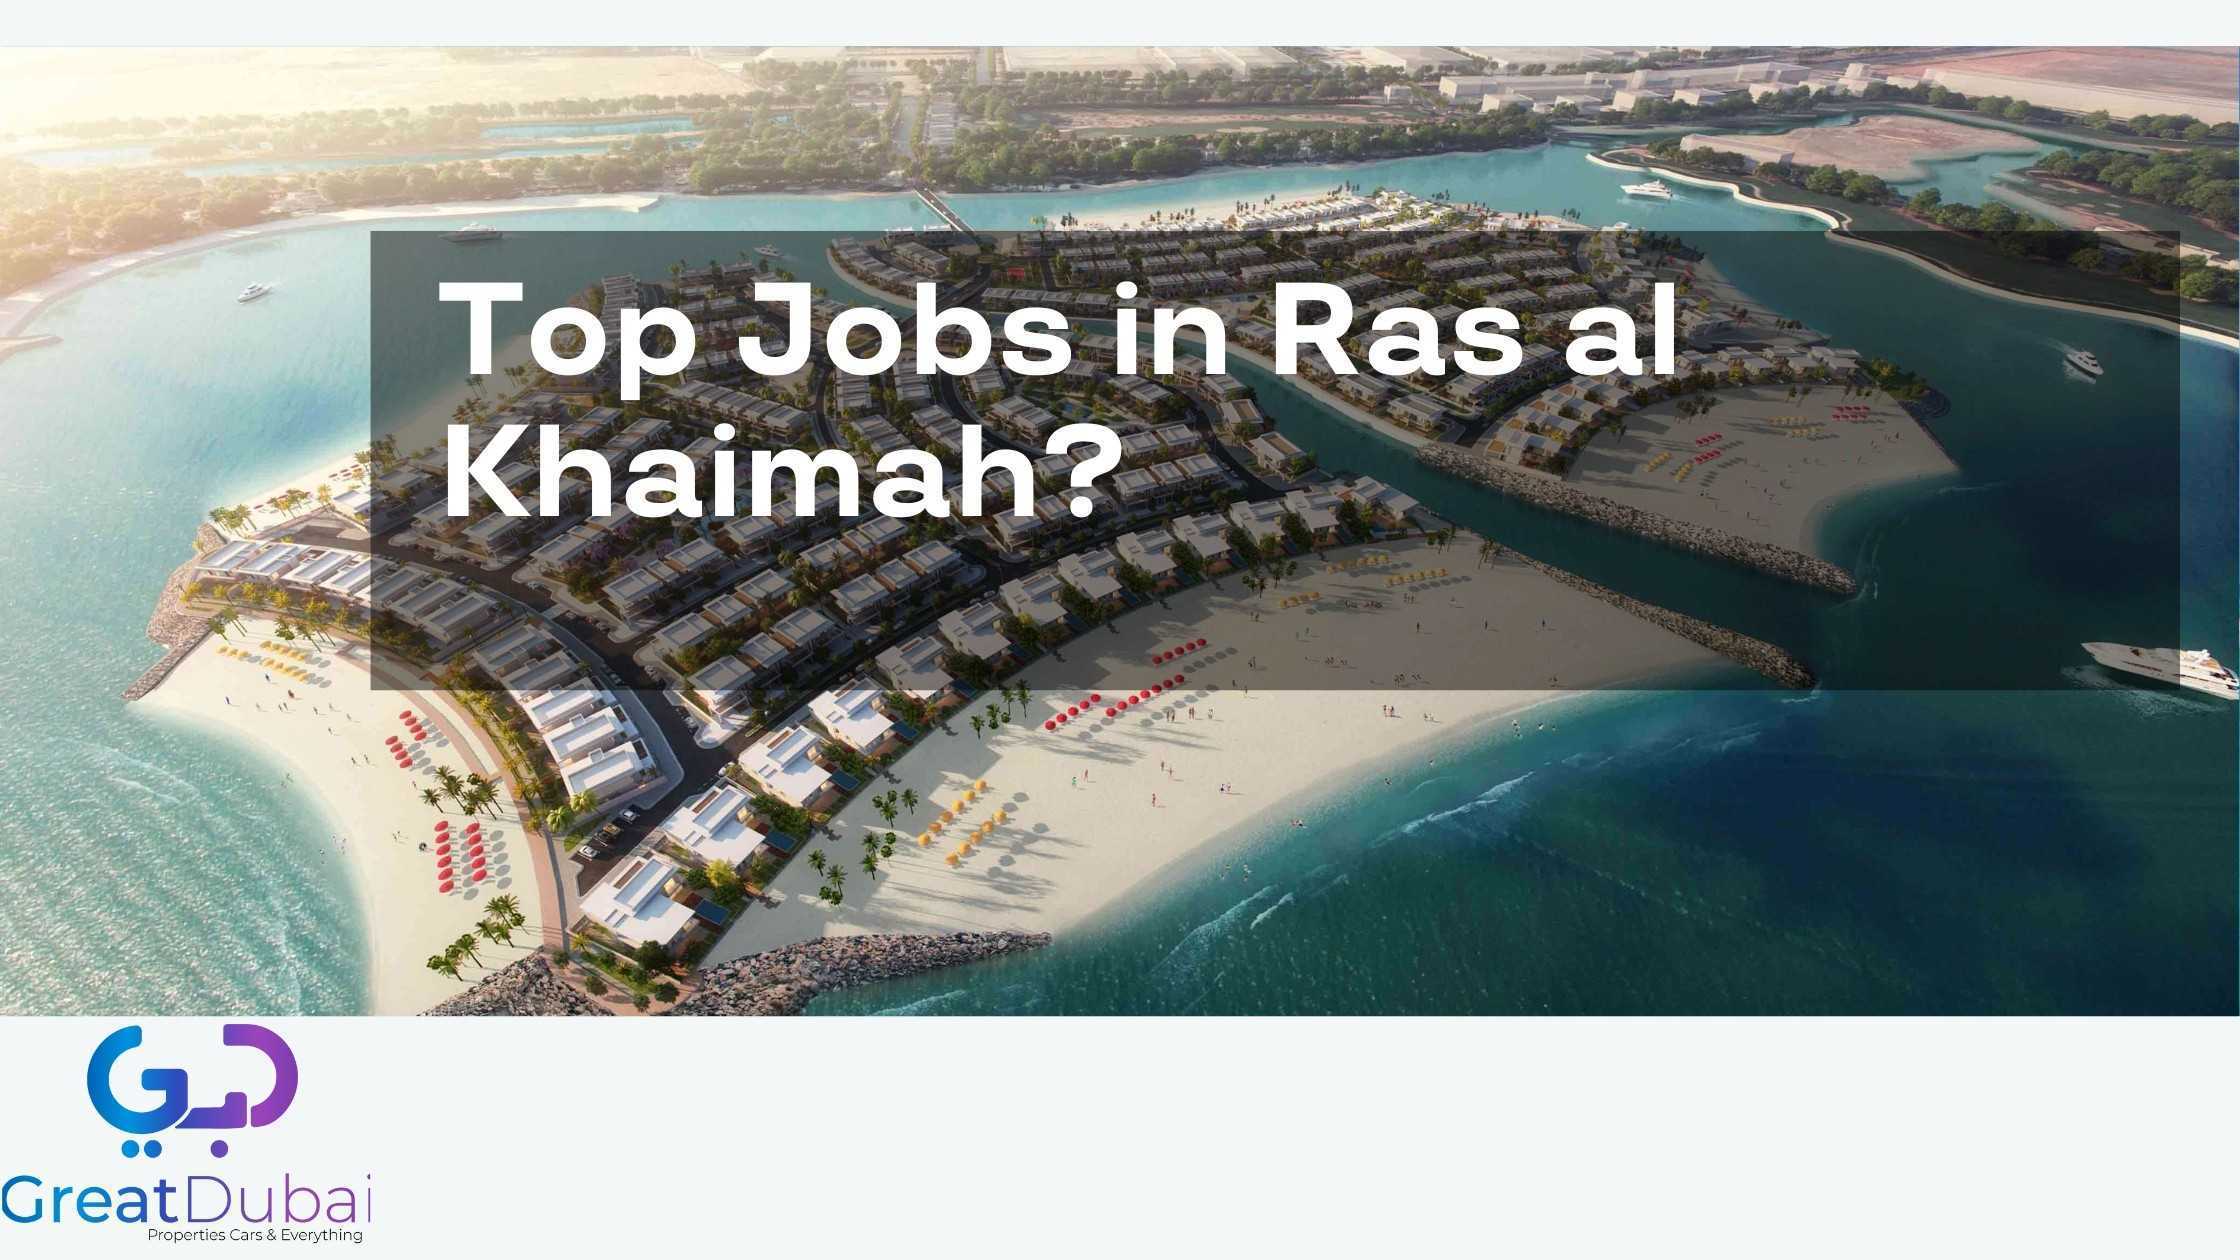 What are The Top Jobs in Ras al Khaimah?